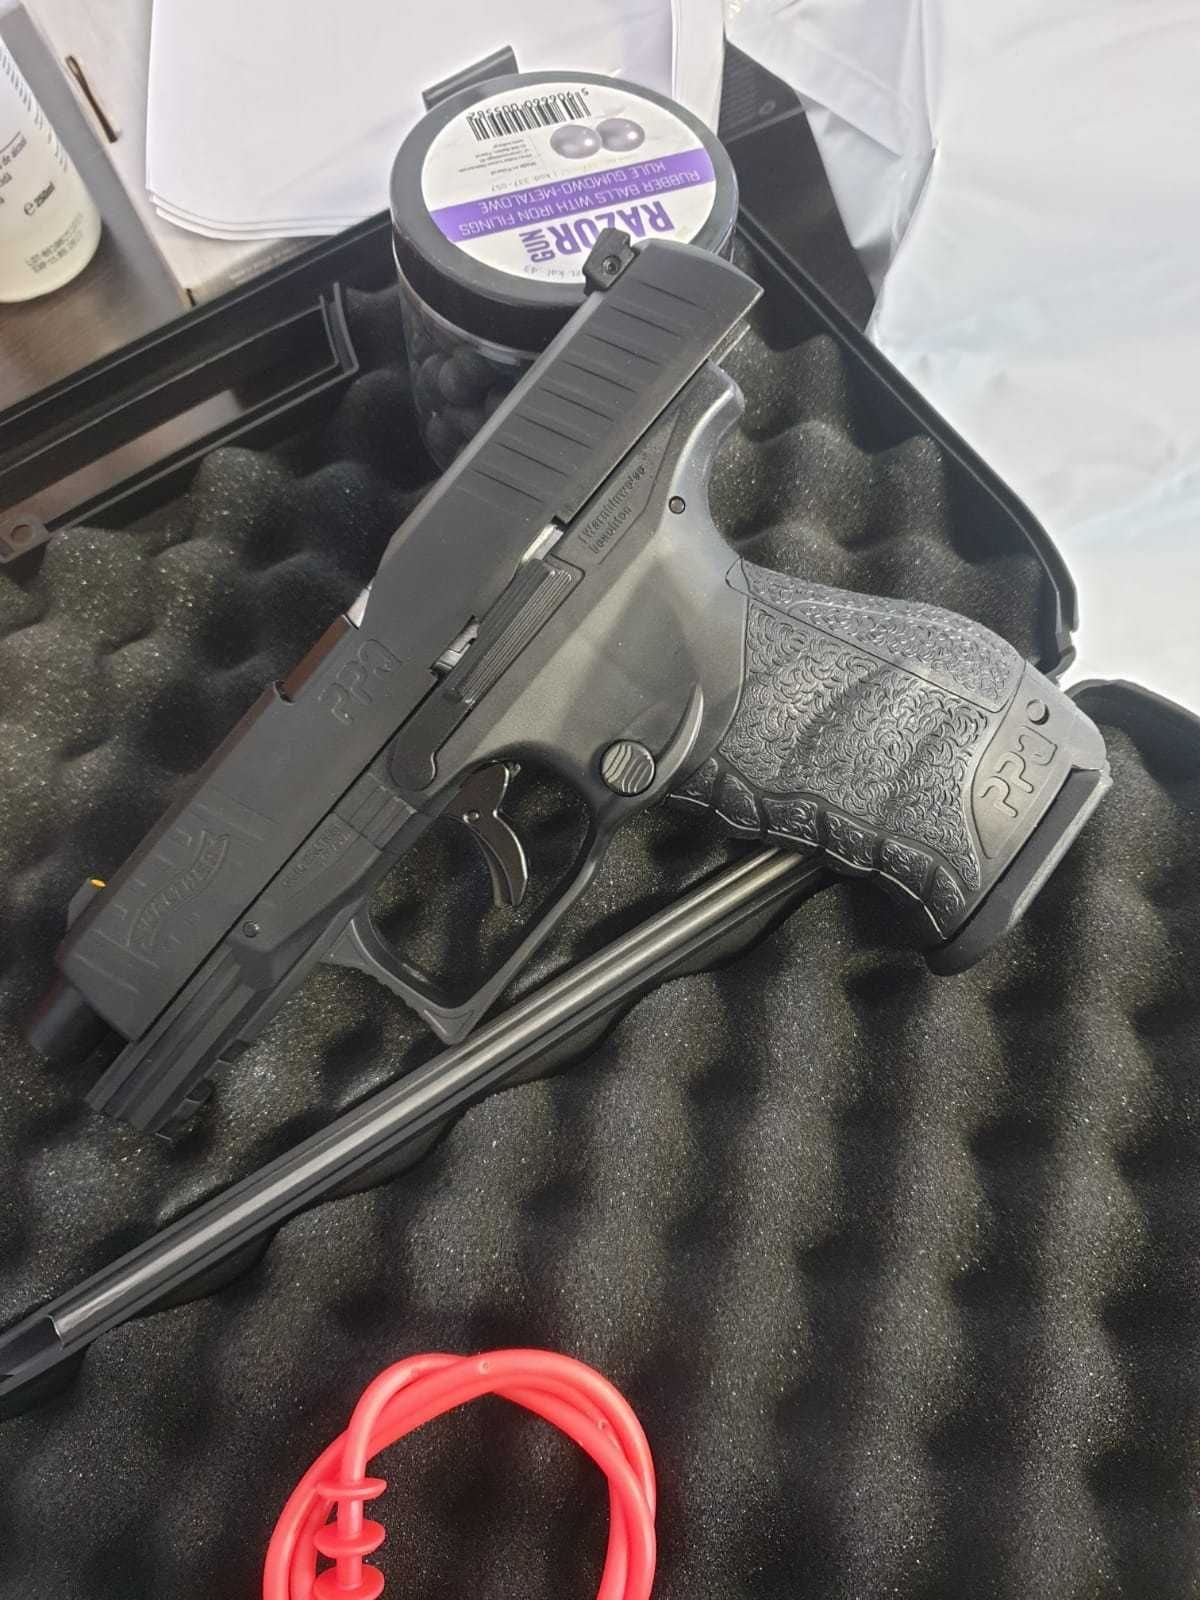 Pistol Airsoft AutoAparare Walther PPQ Model 24jouli BlowBack METAL